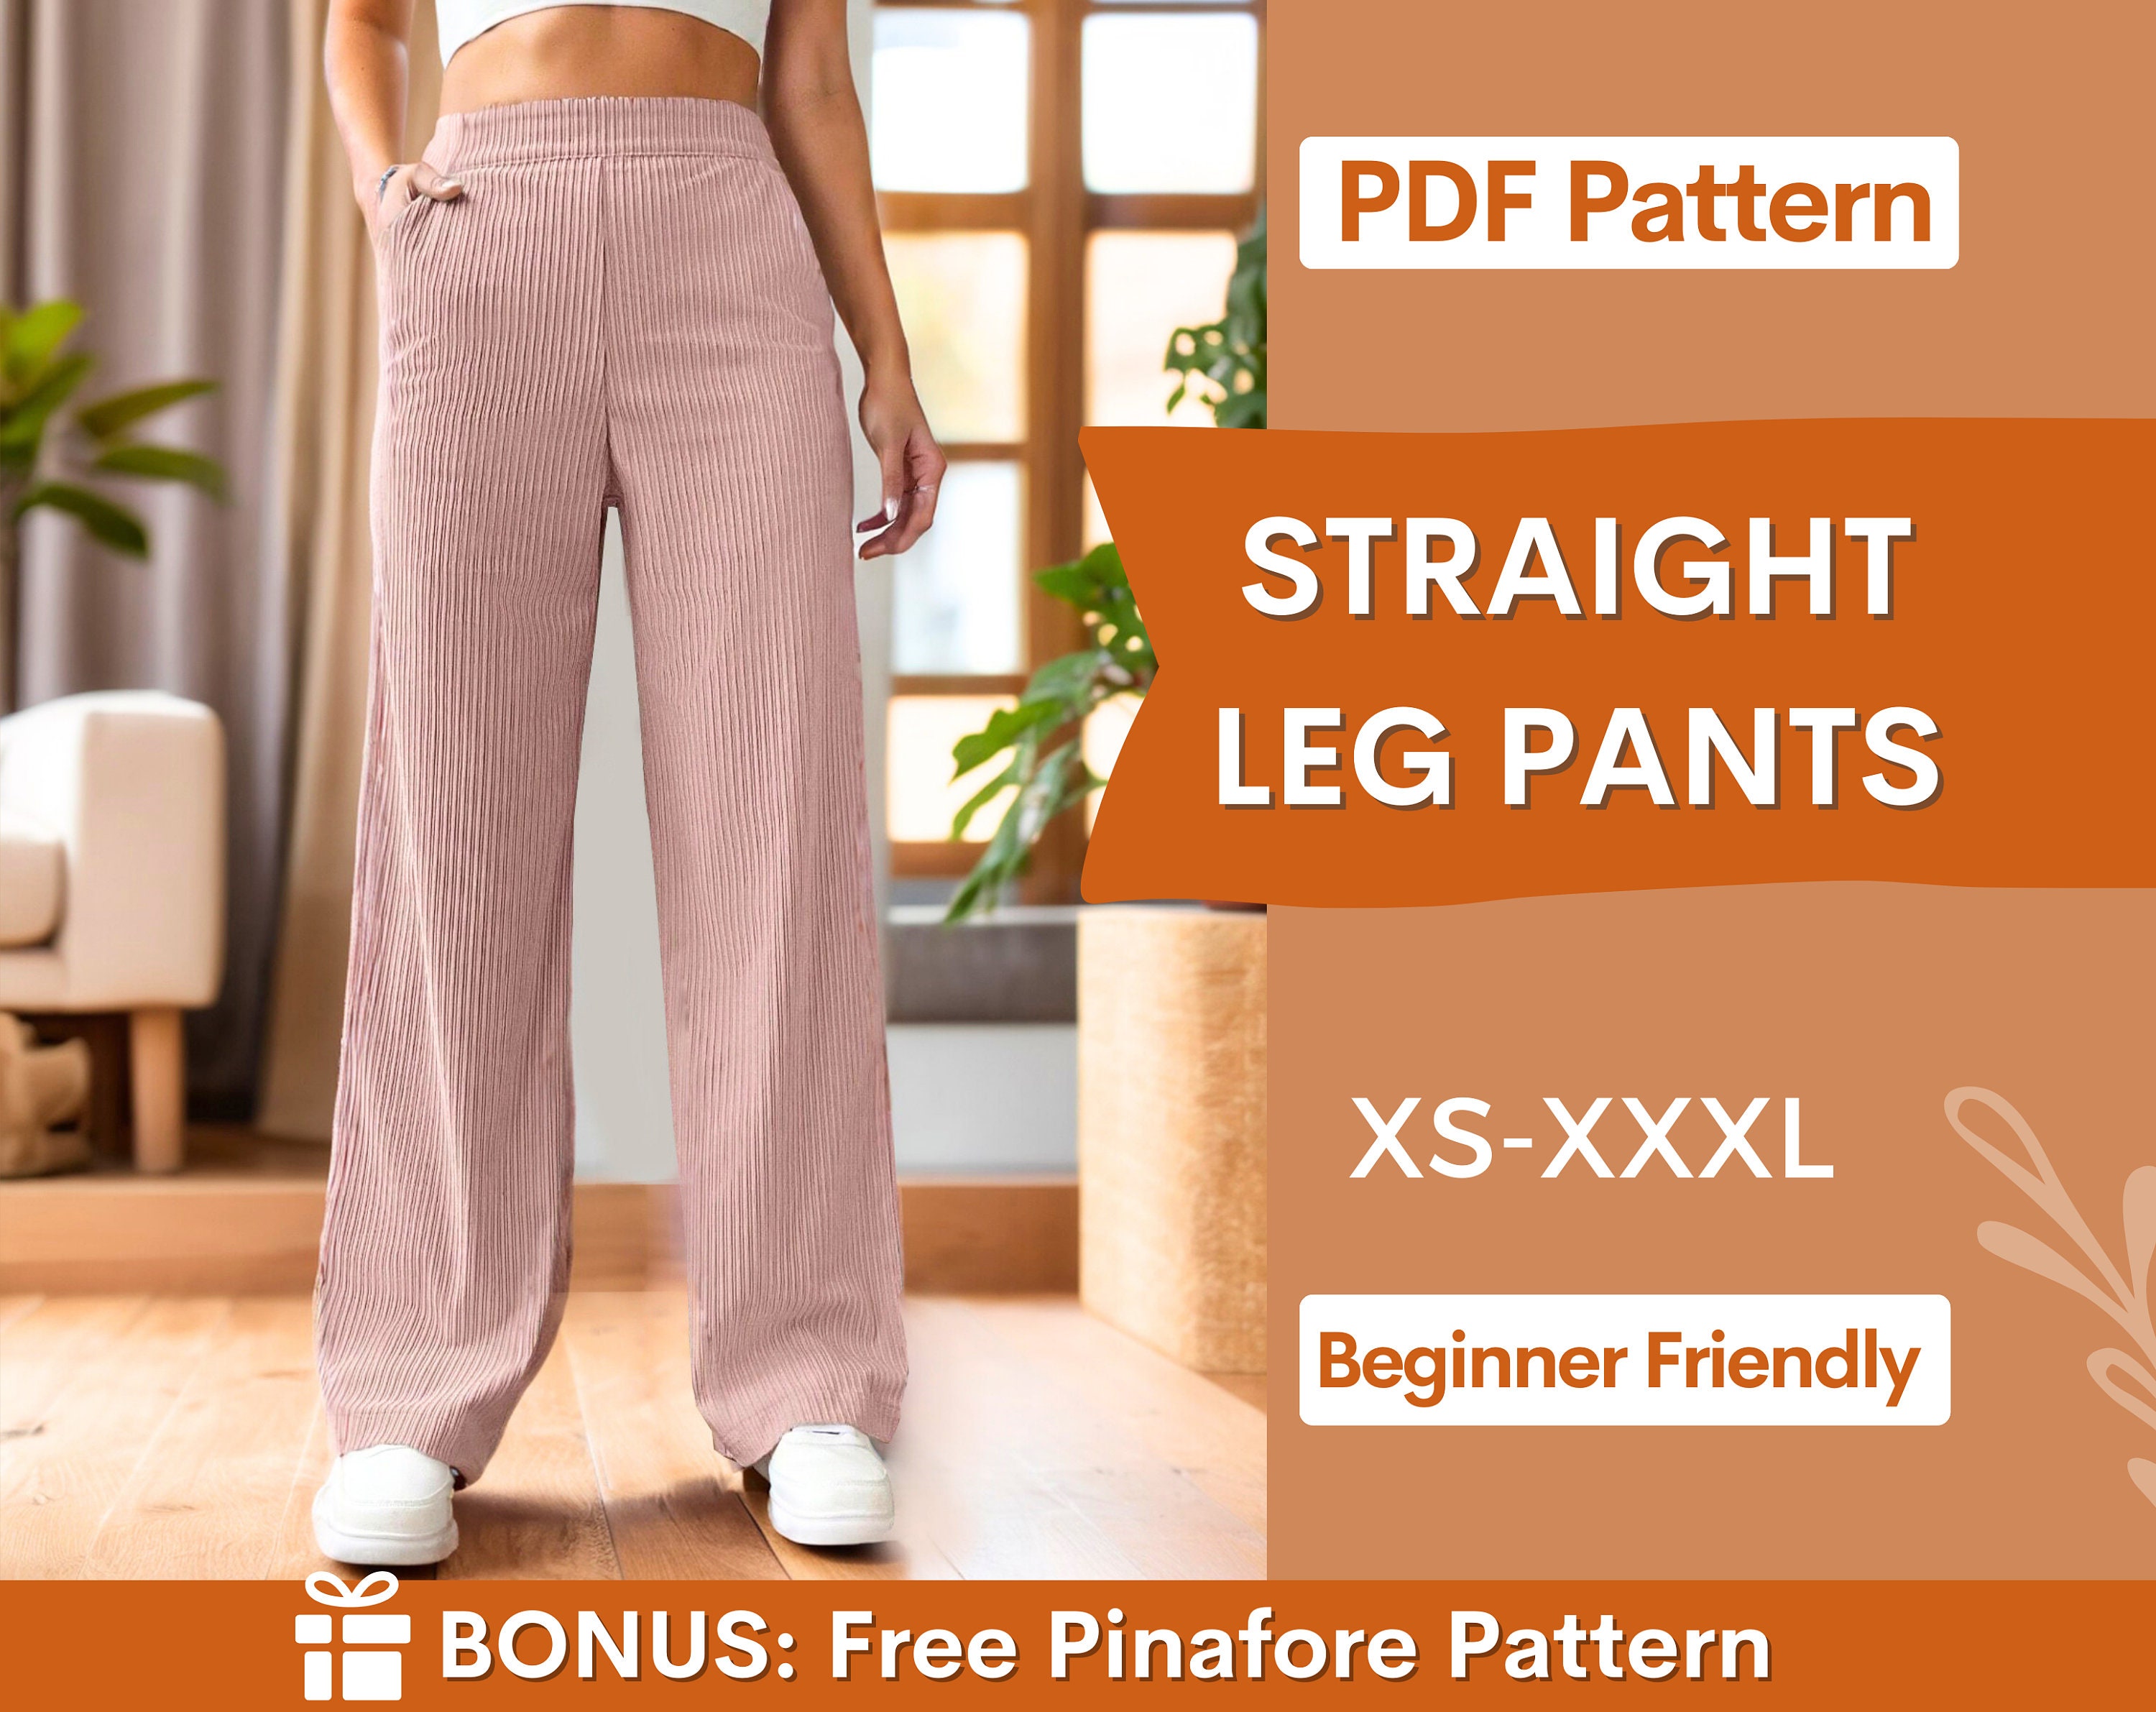 Wide Leg Lounge Pants With a Foldover Waist, Low Rise, High